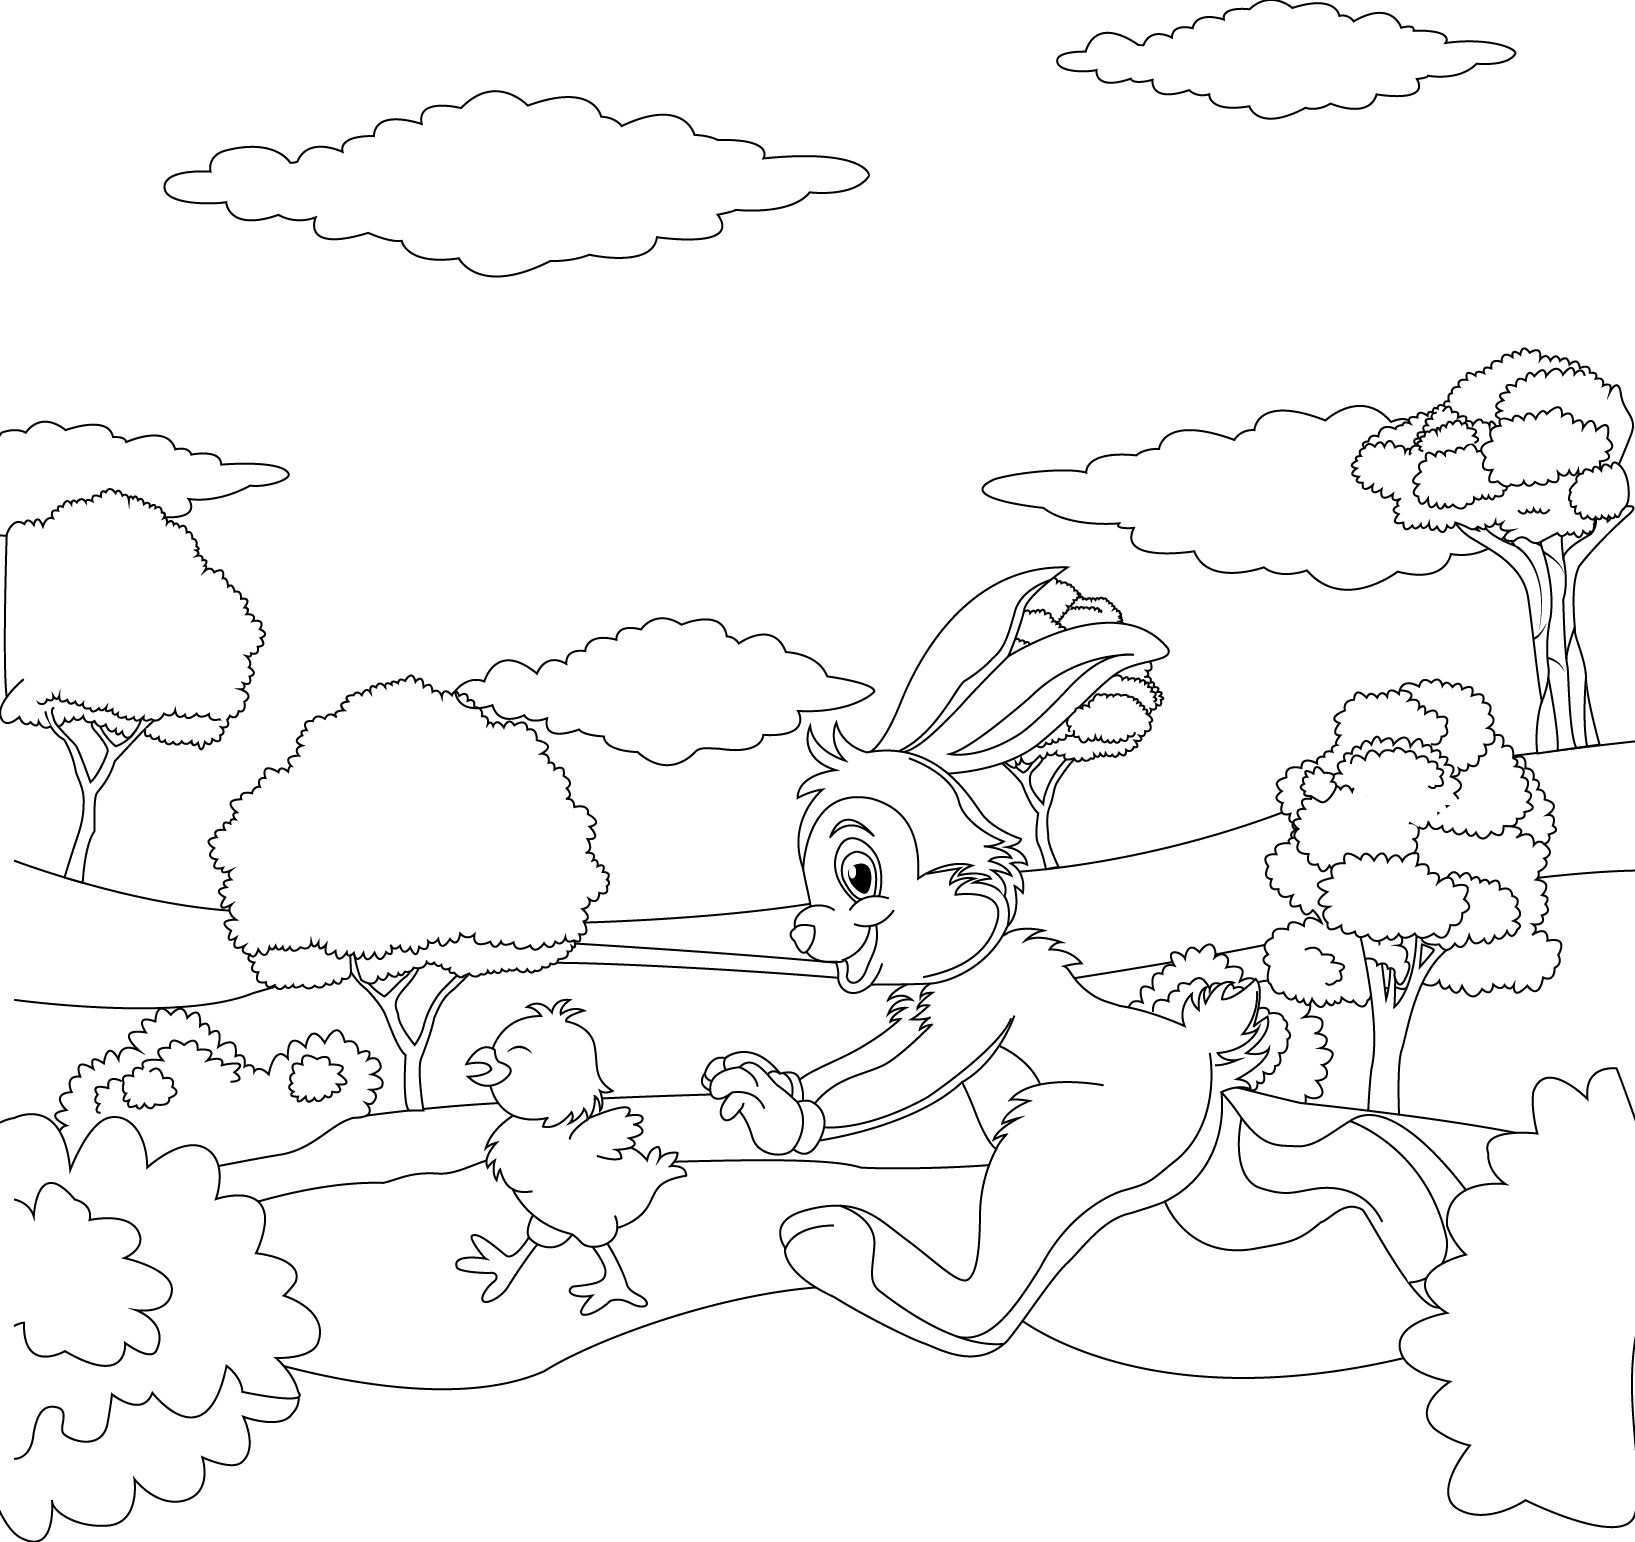 Sezan12 I Will Create A Coloring Book Page For Children For 5 On Fiverr Com Coloring Books Coloring Book Pages Book Pages